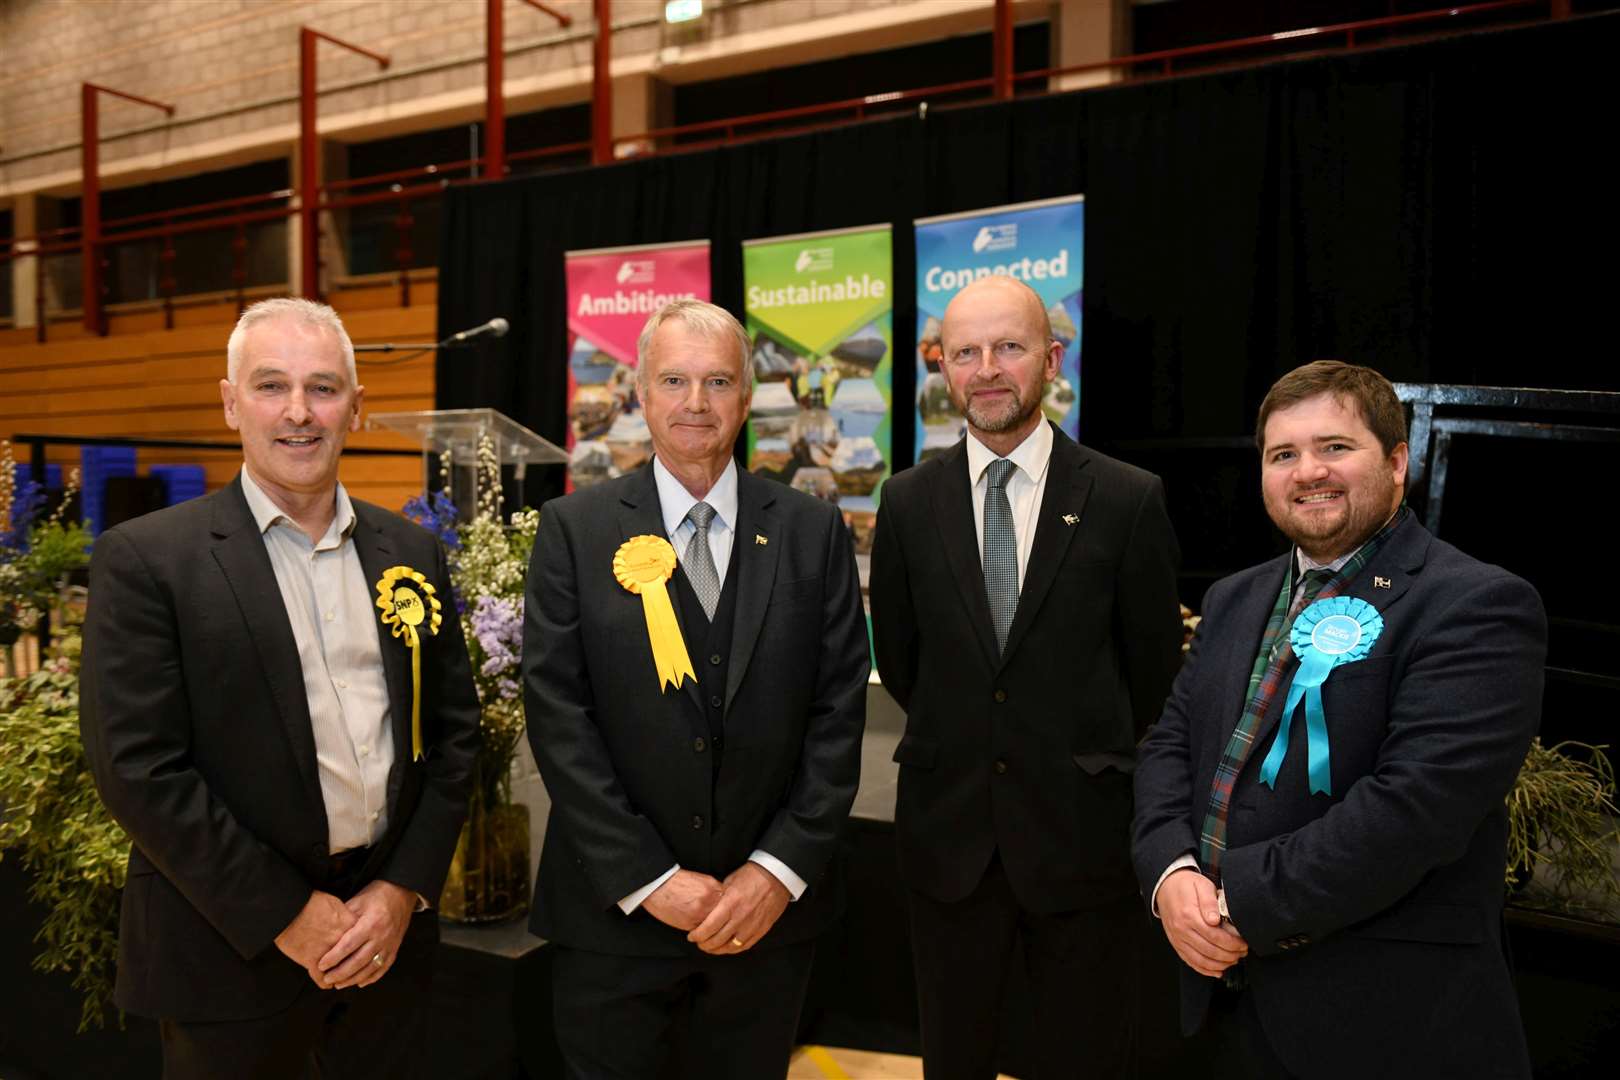 The SNP's Karl Rosie (left) was elected alongside Ron Gunn (Lib Dem), Matthew Reiss (Independent) and Struan Mackie (Scottish Conservative and Unionist) in the Thurso and Northwest Caithness ward. Picture: Callum Mackay